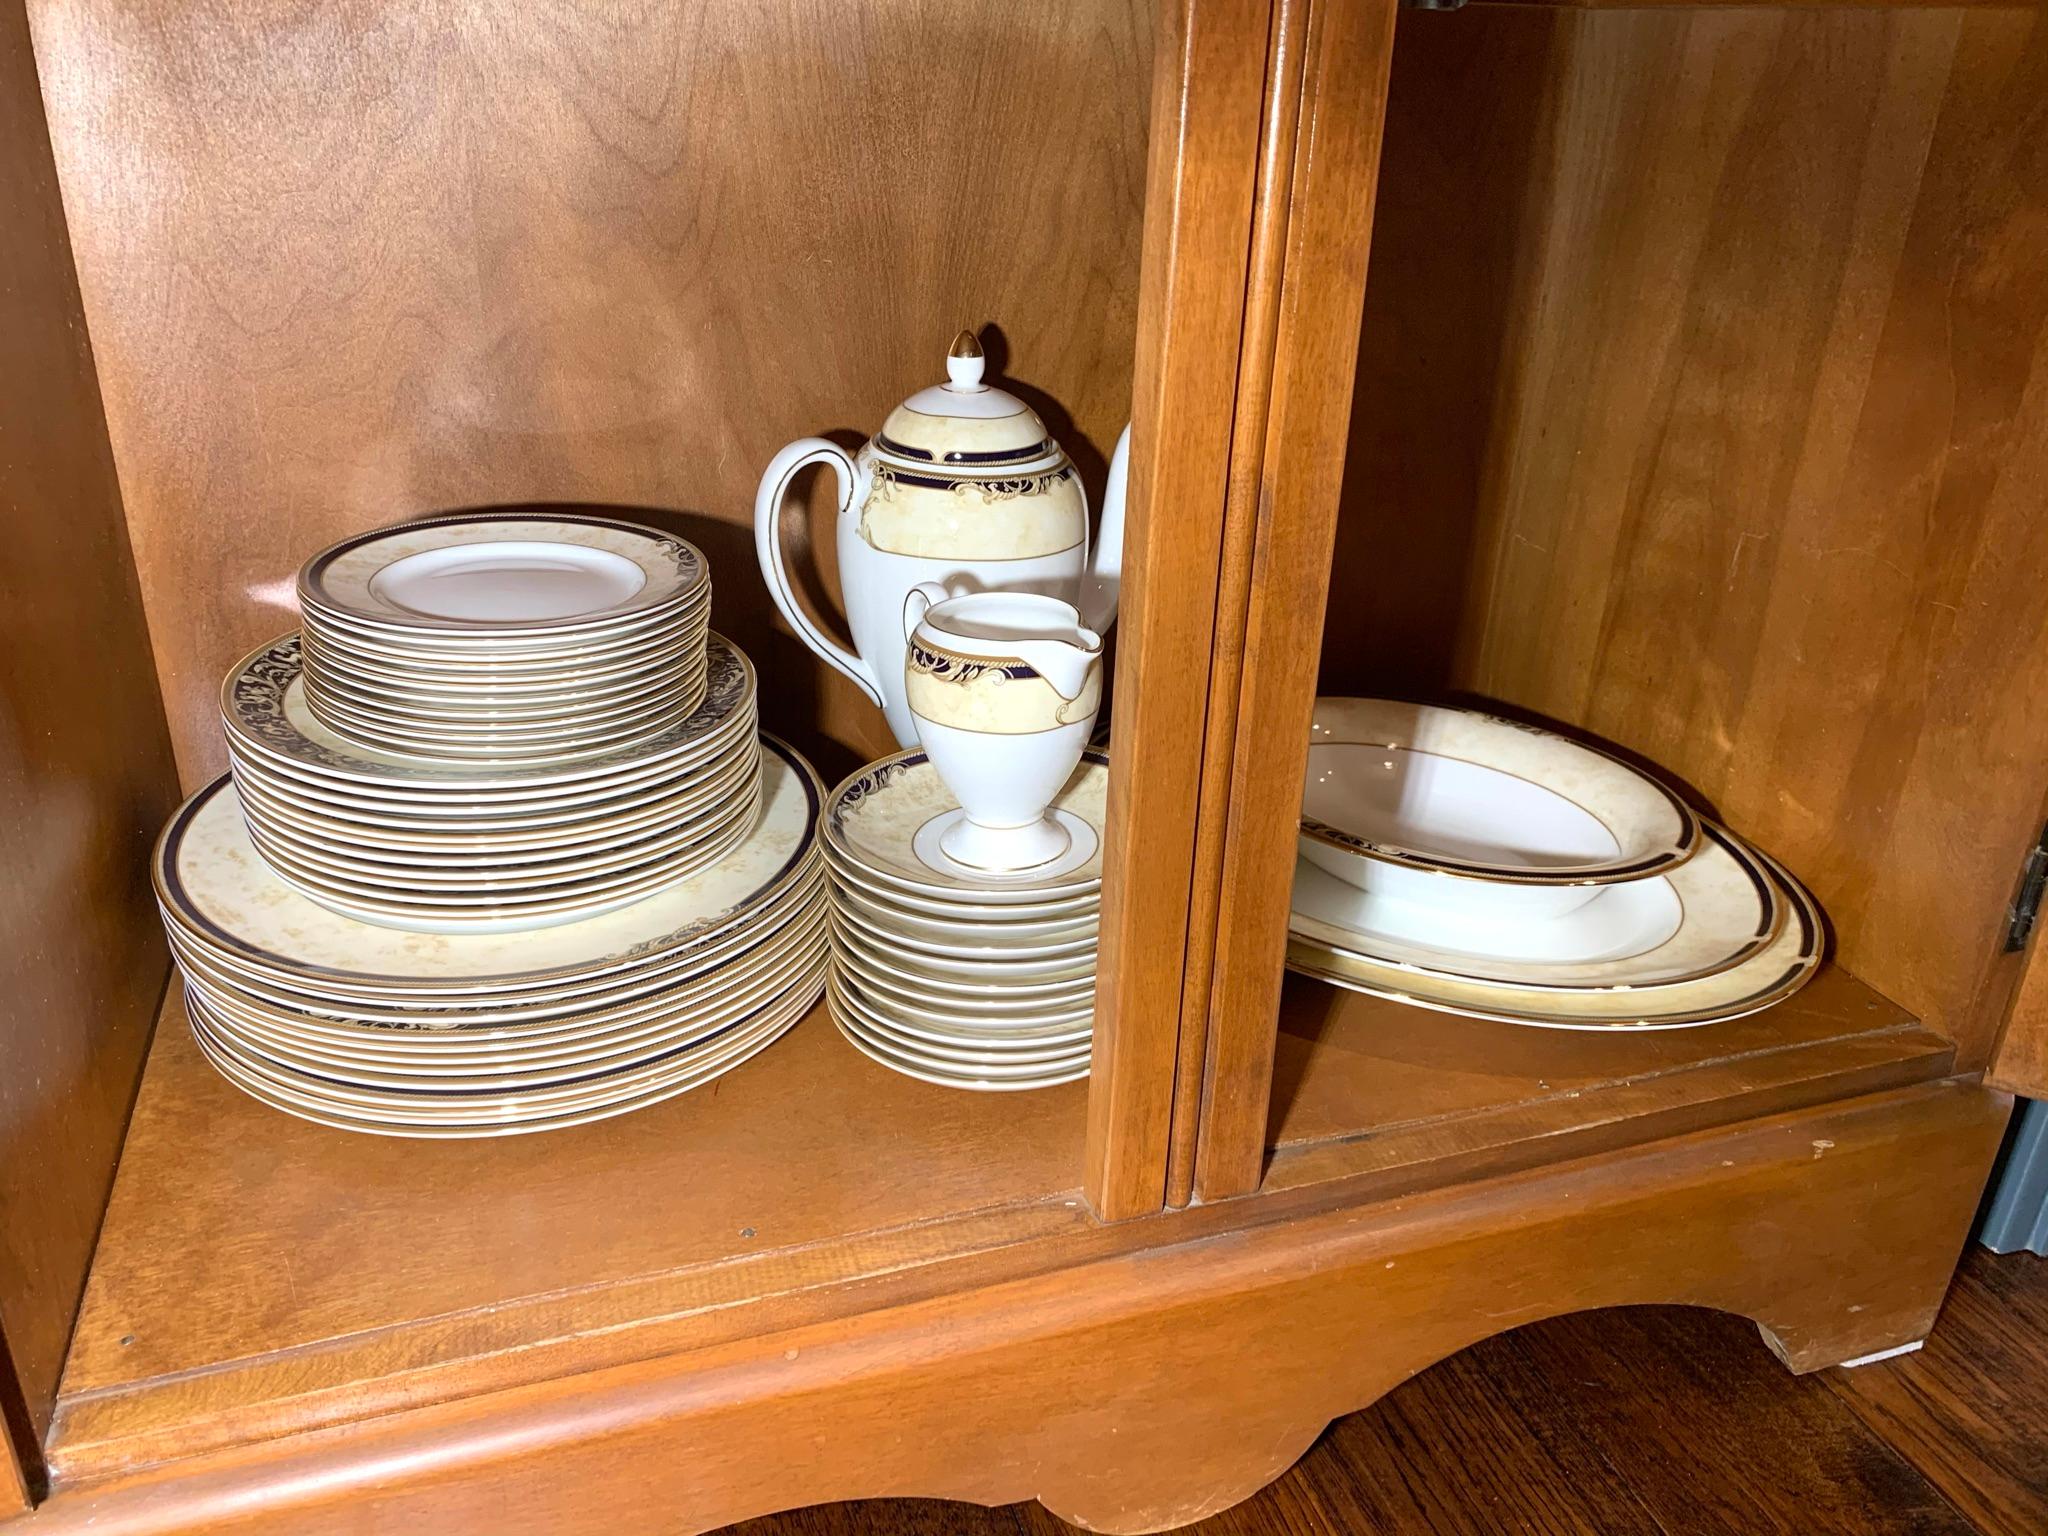 68 Piece Wedgwood China Set.  Well taken care of.